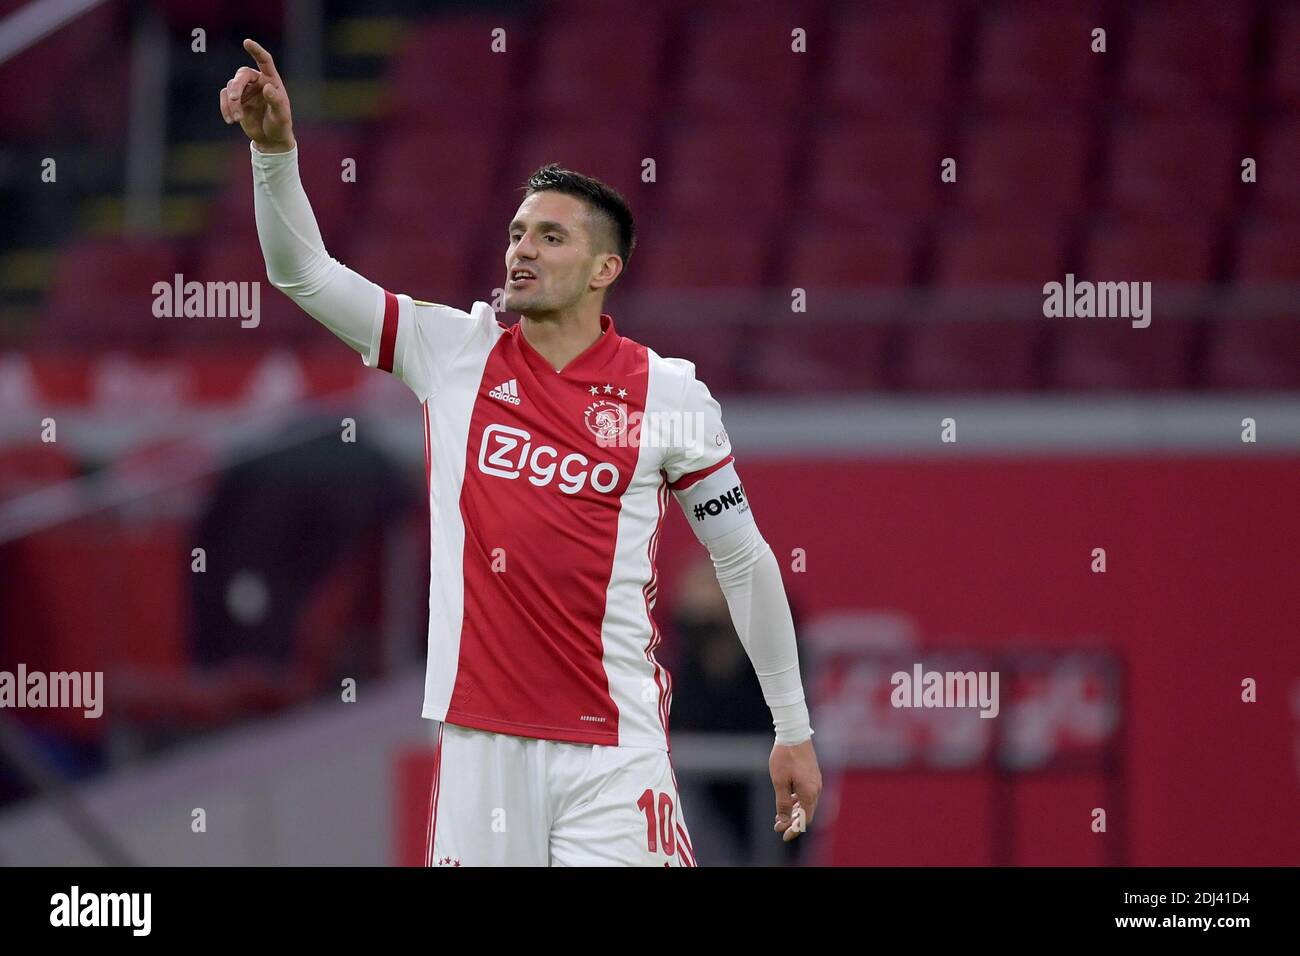 AMSTERDAM, NETHERLANDS - DECEMBER 12: Dusan Tadic of Ajax with OneLove rainbow colors captaincy during the Dutch Eredivisie match between Ajax and PEC Stock Photo